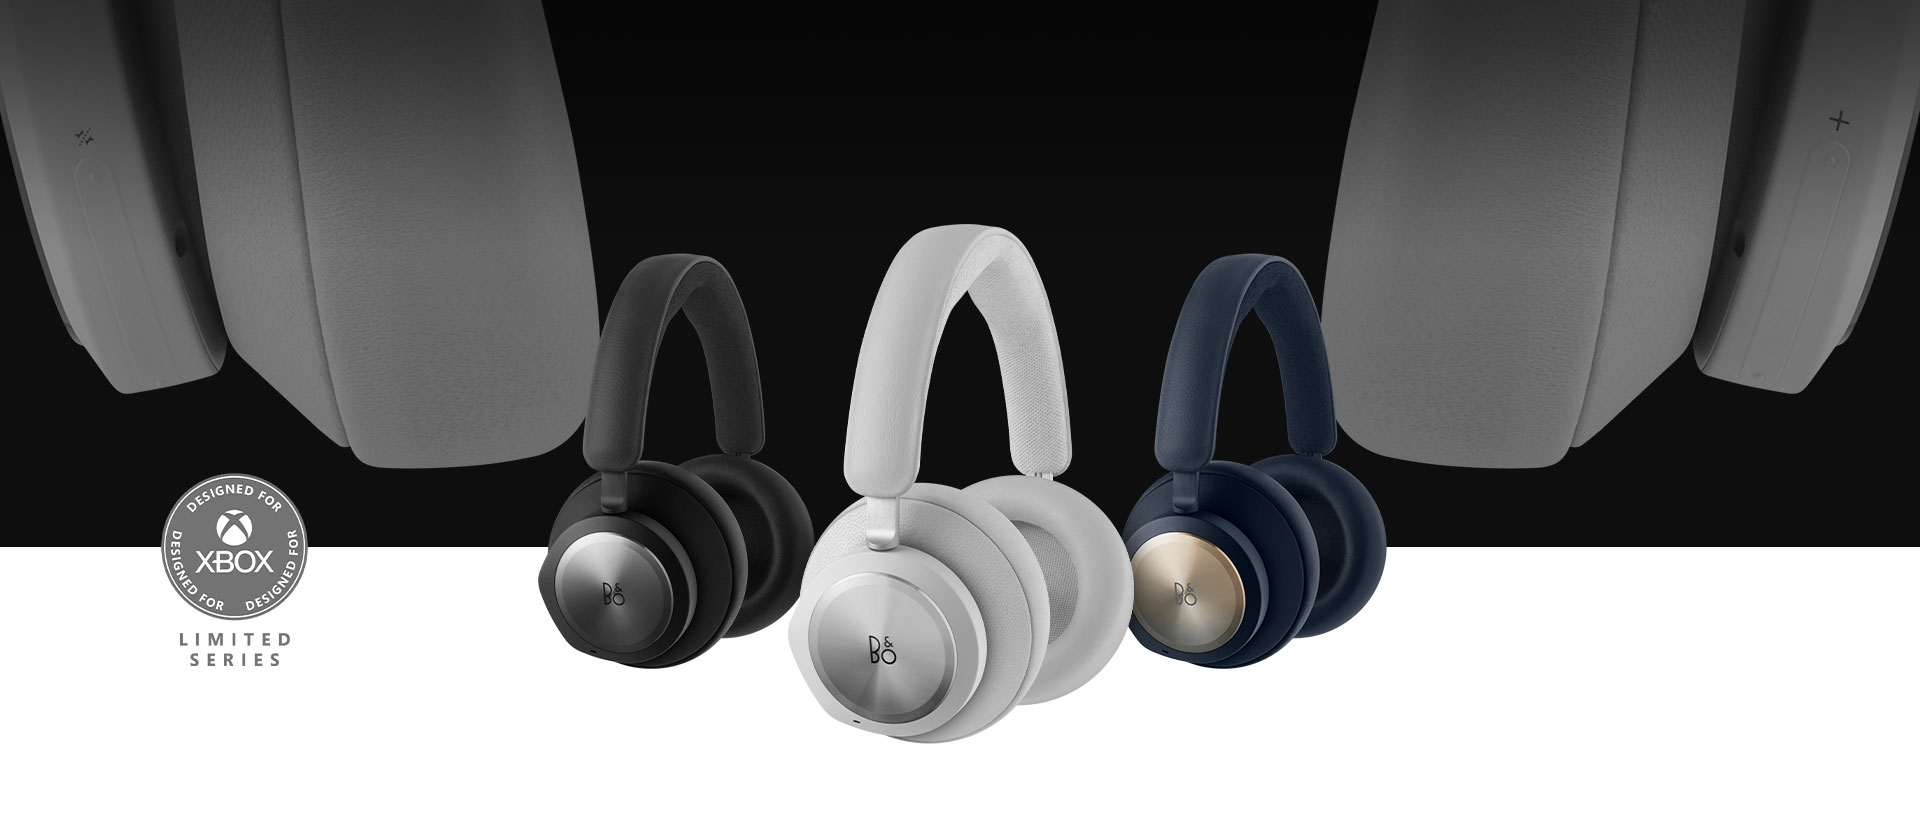 Designed for Xbox badge, Limited Series, Bang and Olufsen grey headset in front with the black and navy headset beside it